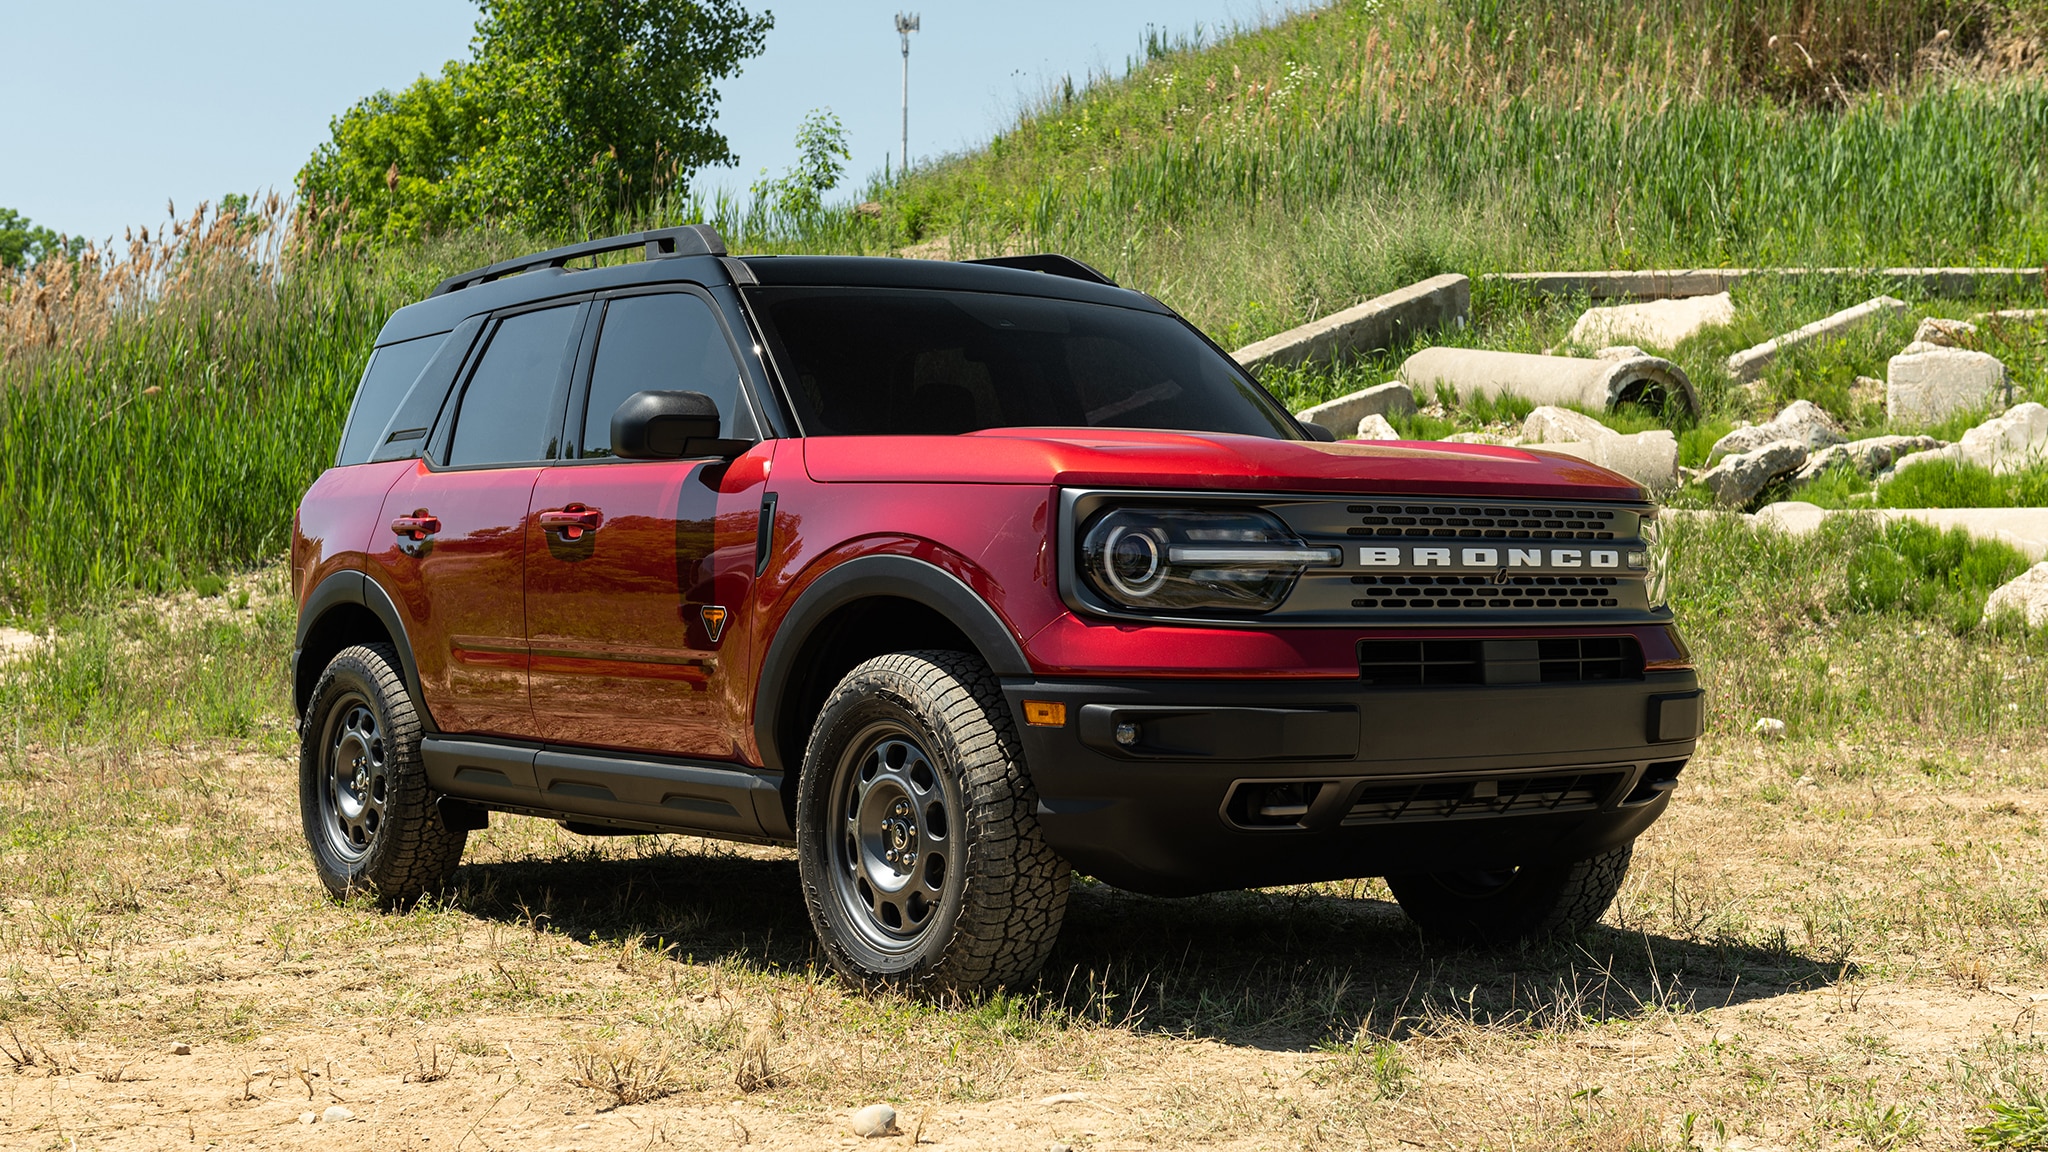 Ford Bronco reservation crosses 150,000 mark before scheduled 2021